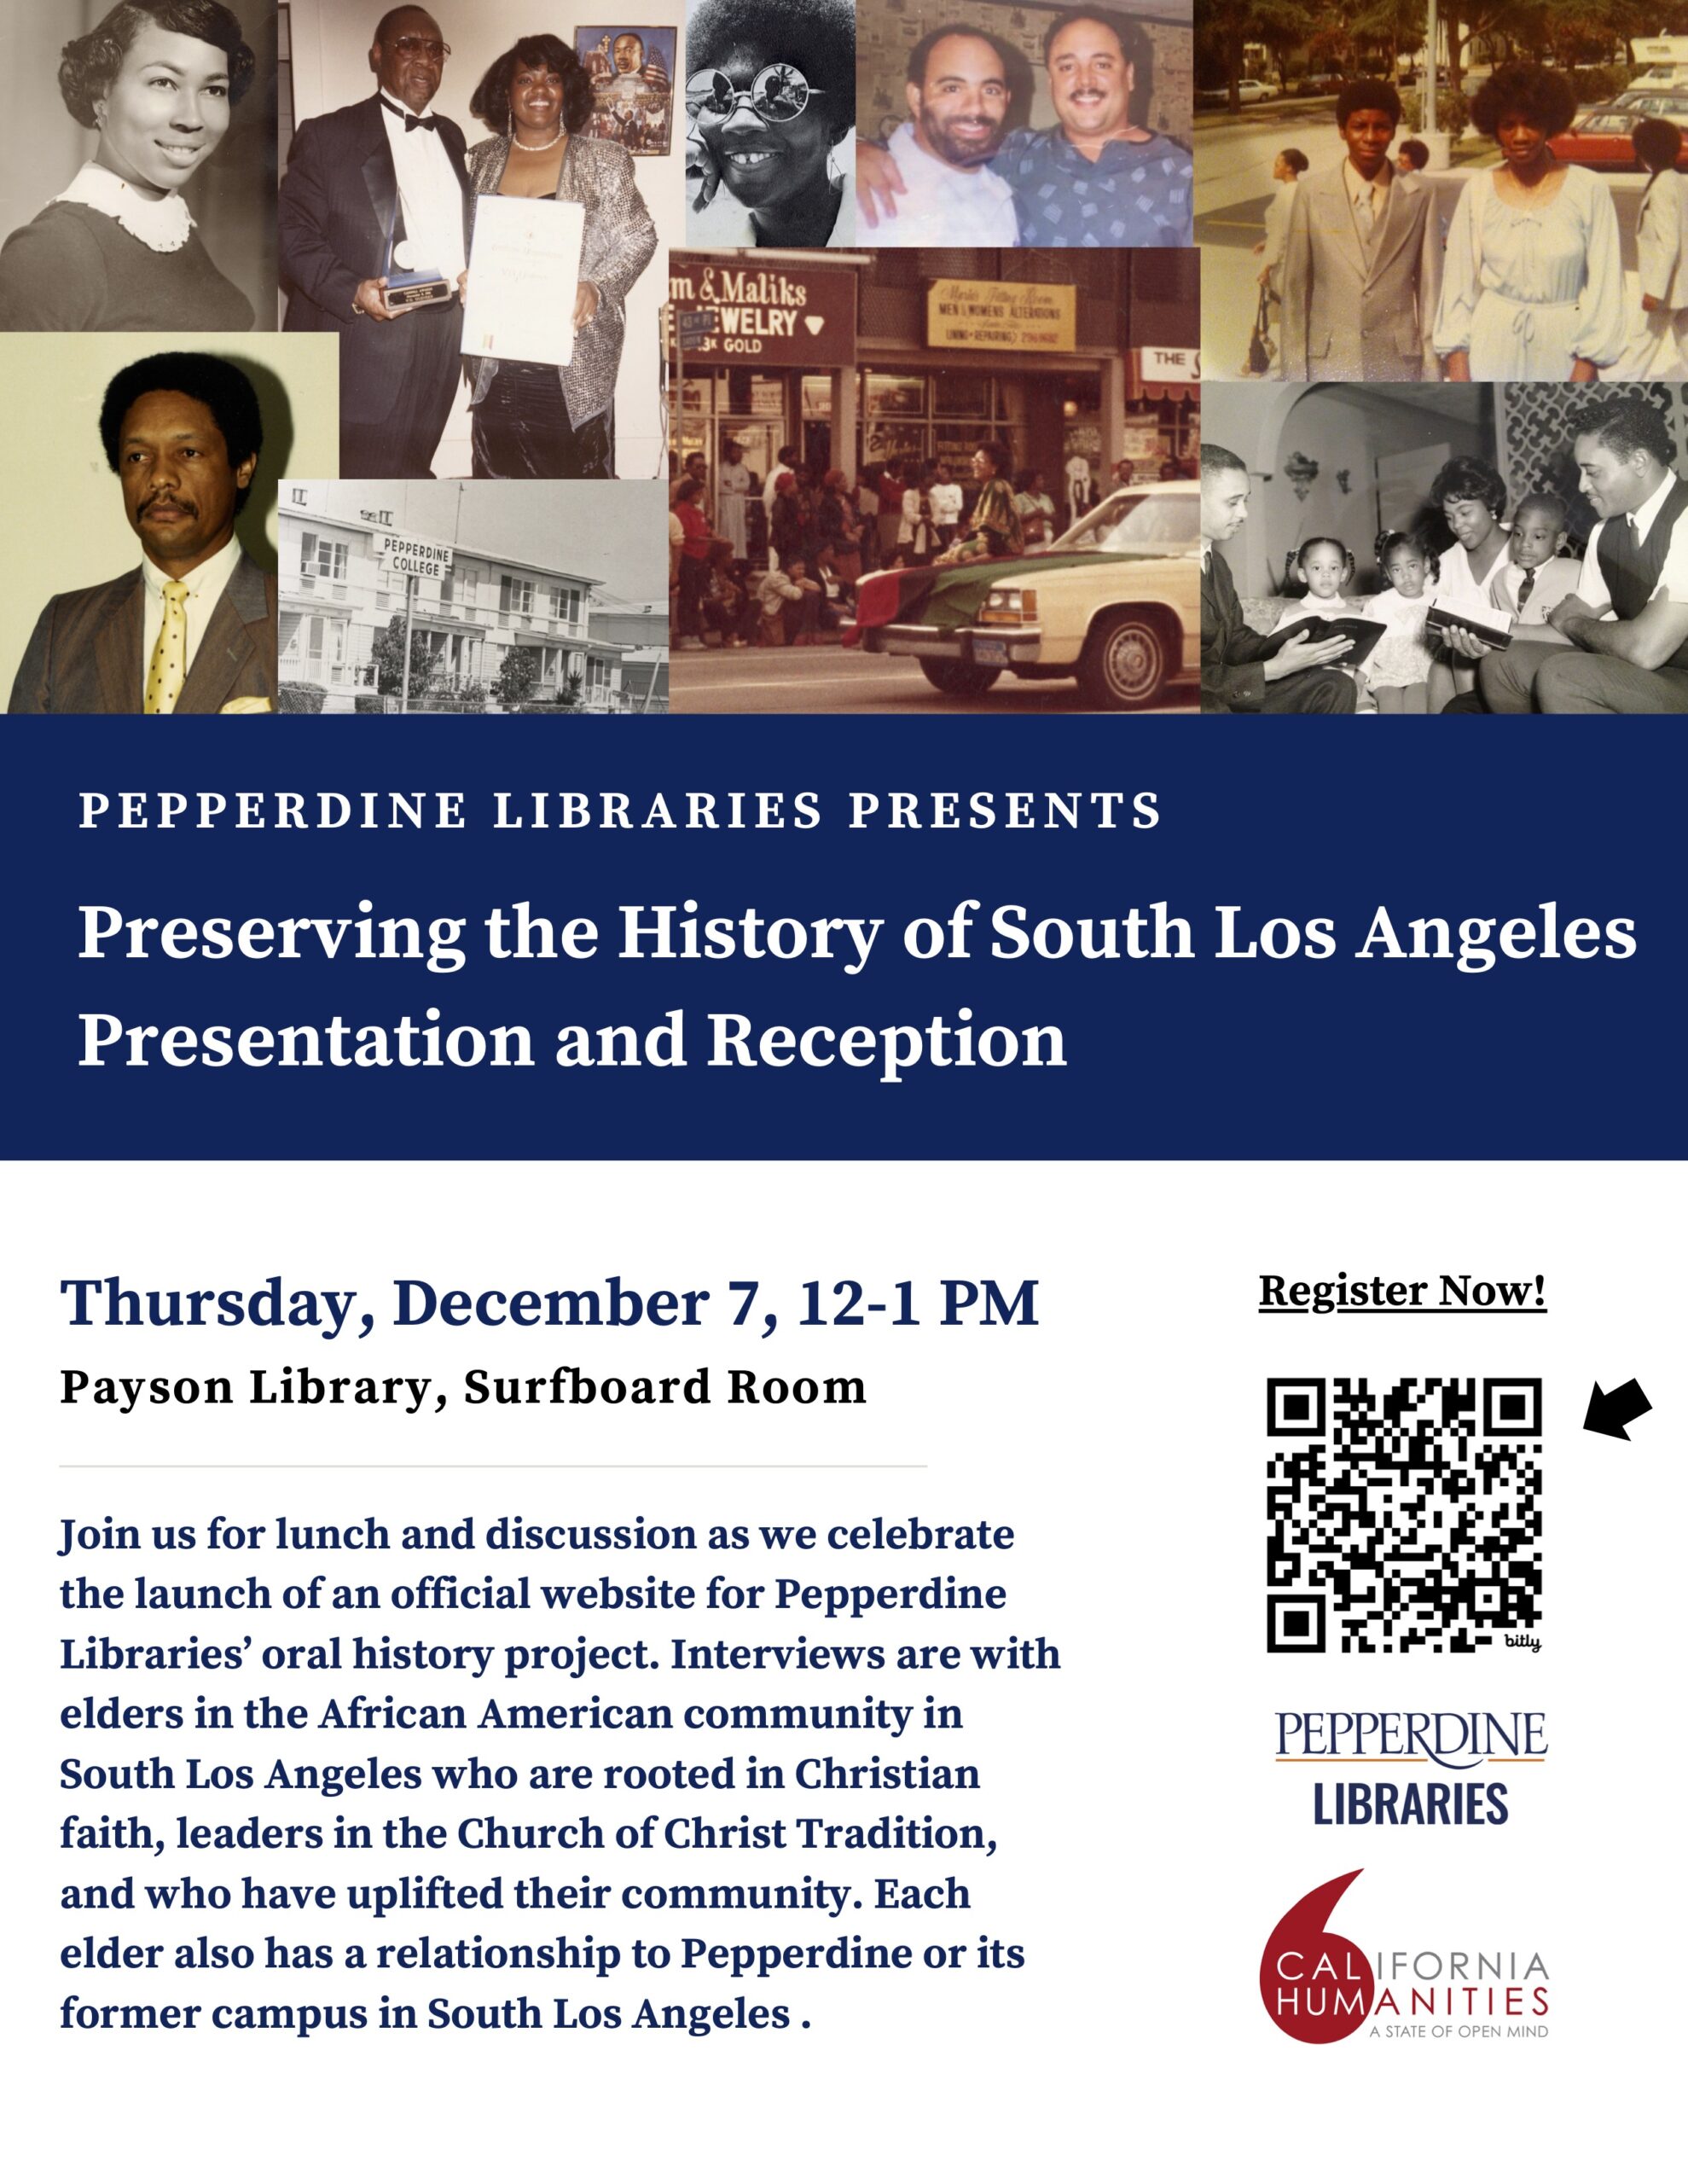 Flyer for opening of Presreving the History of South Los Angeles at Pepperdine Libraries, with collage of family photos along the top.